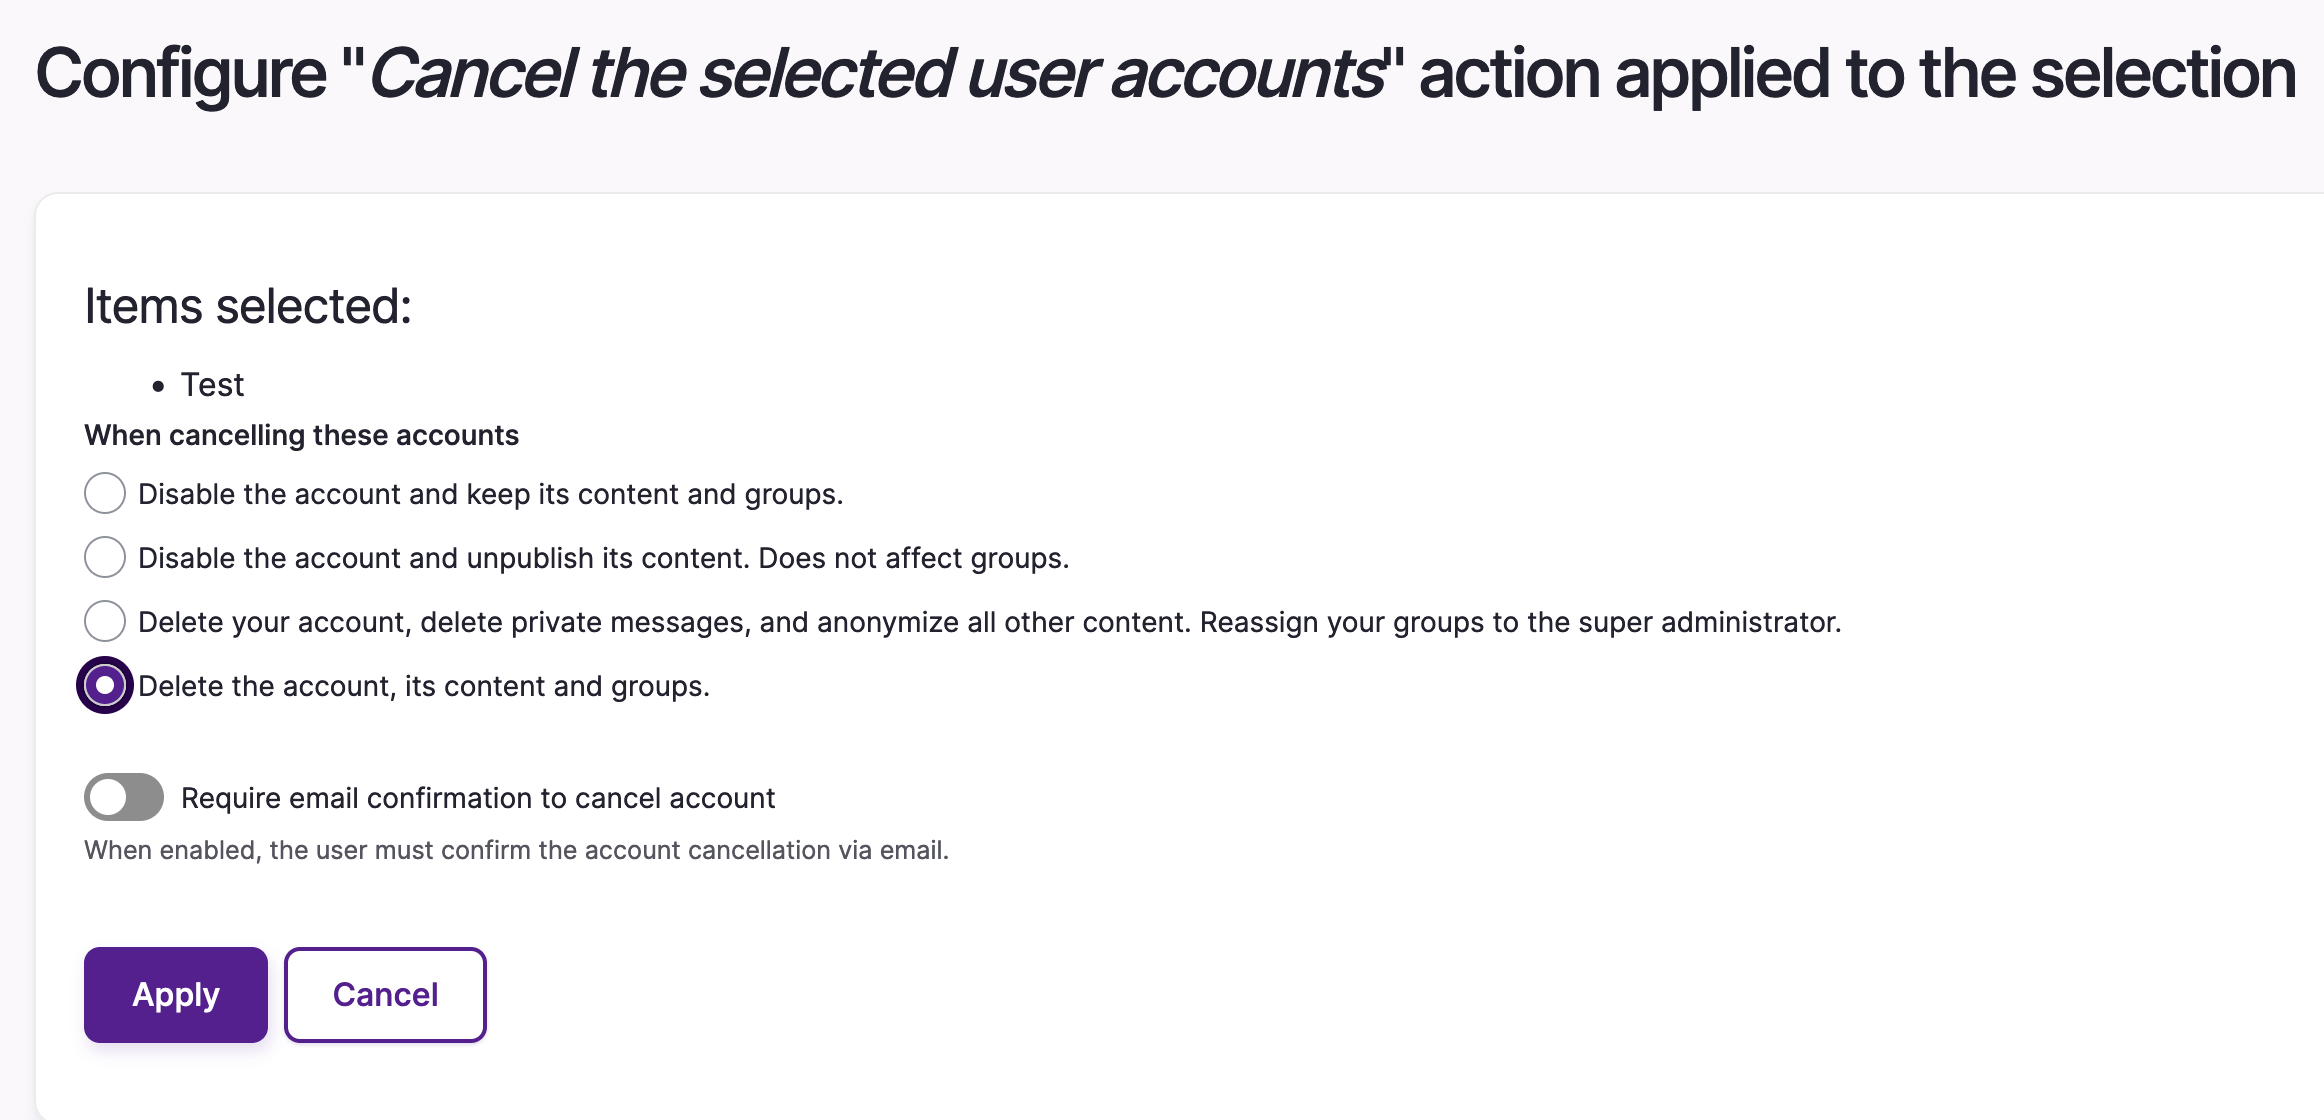 Cancellation options, including "Delete the account, its content and groups"